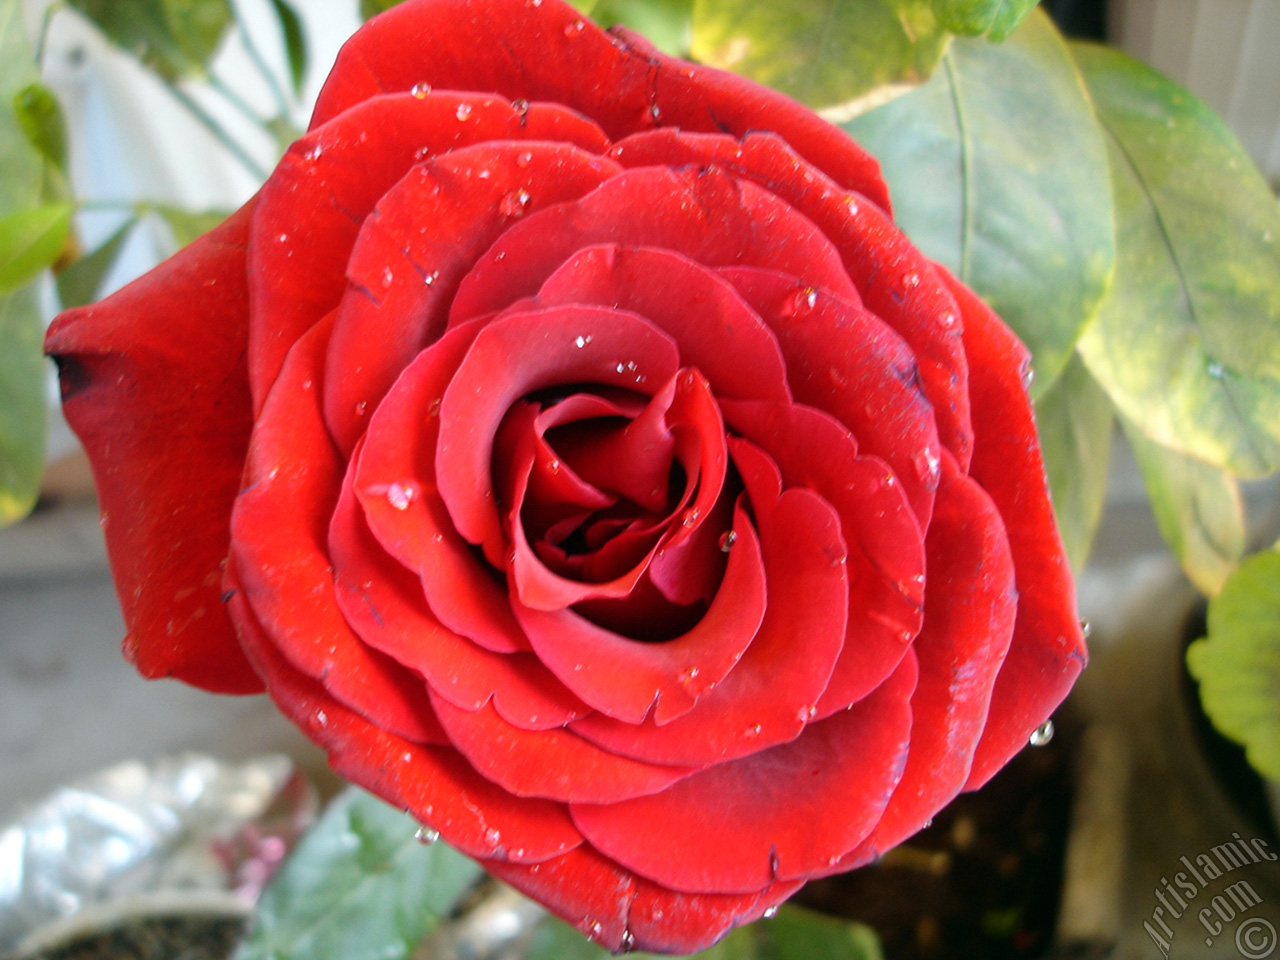 Red rose photo.
